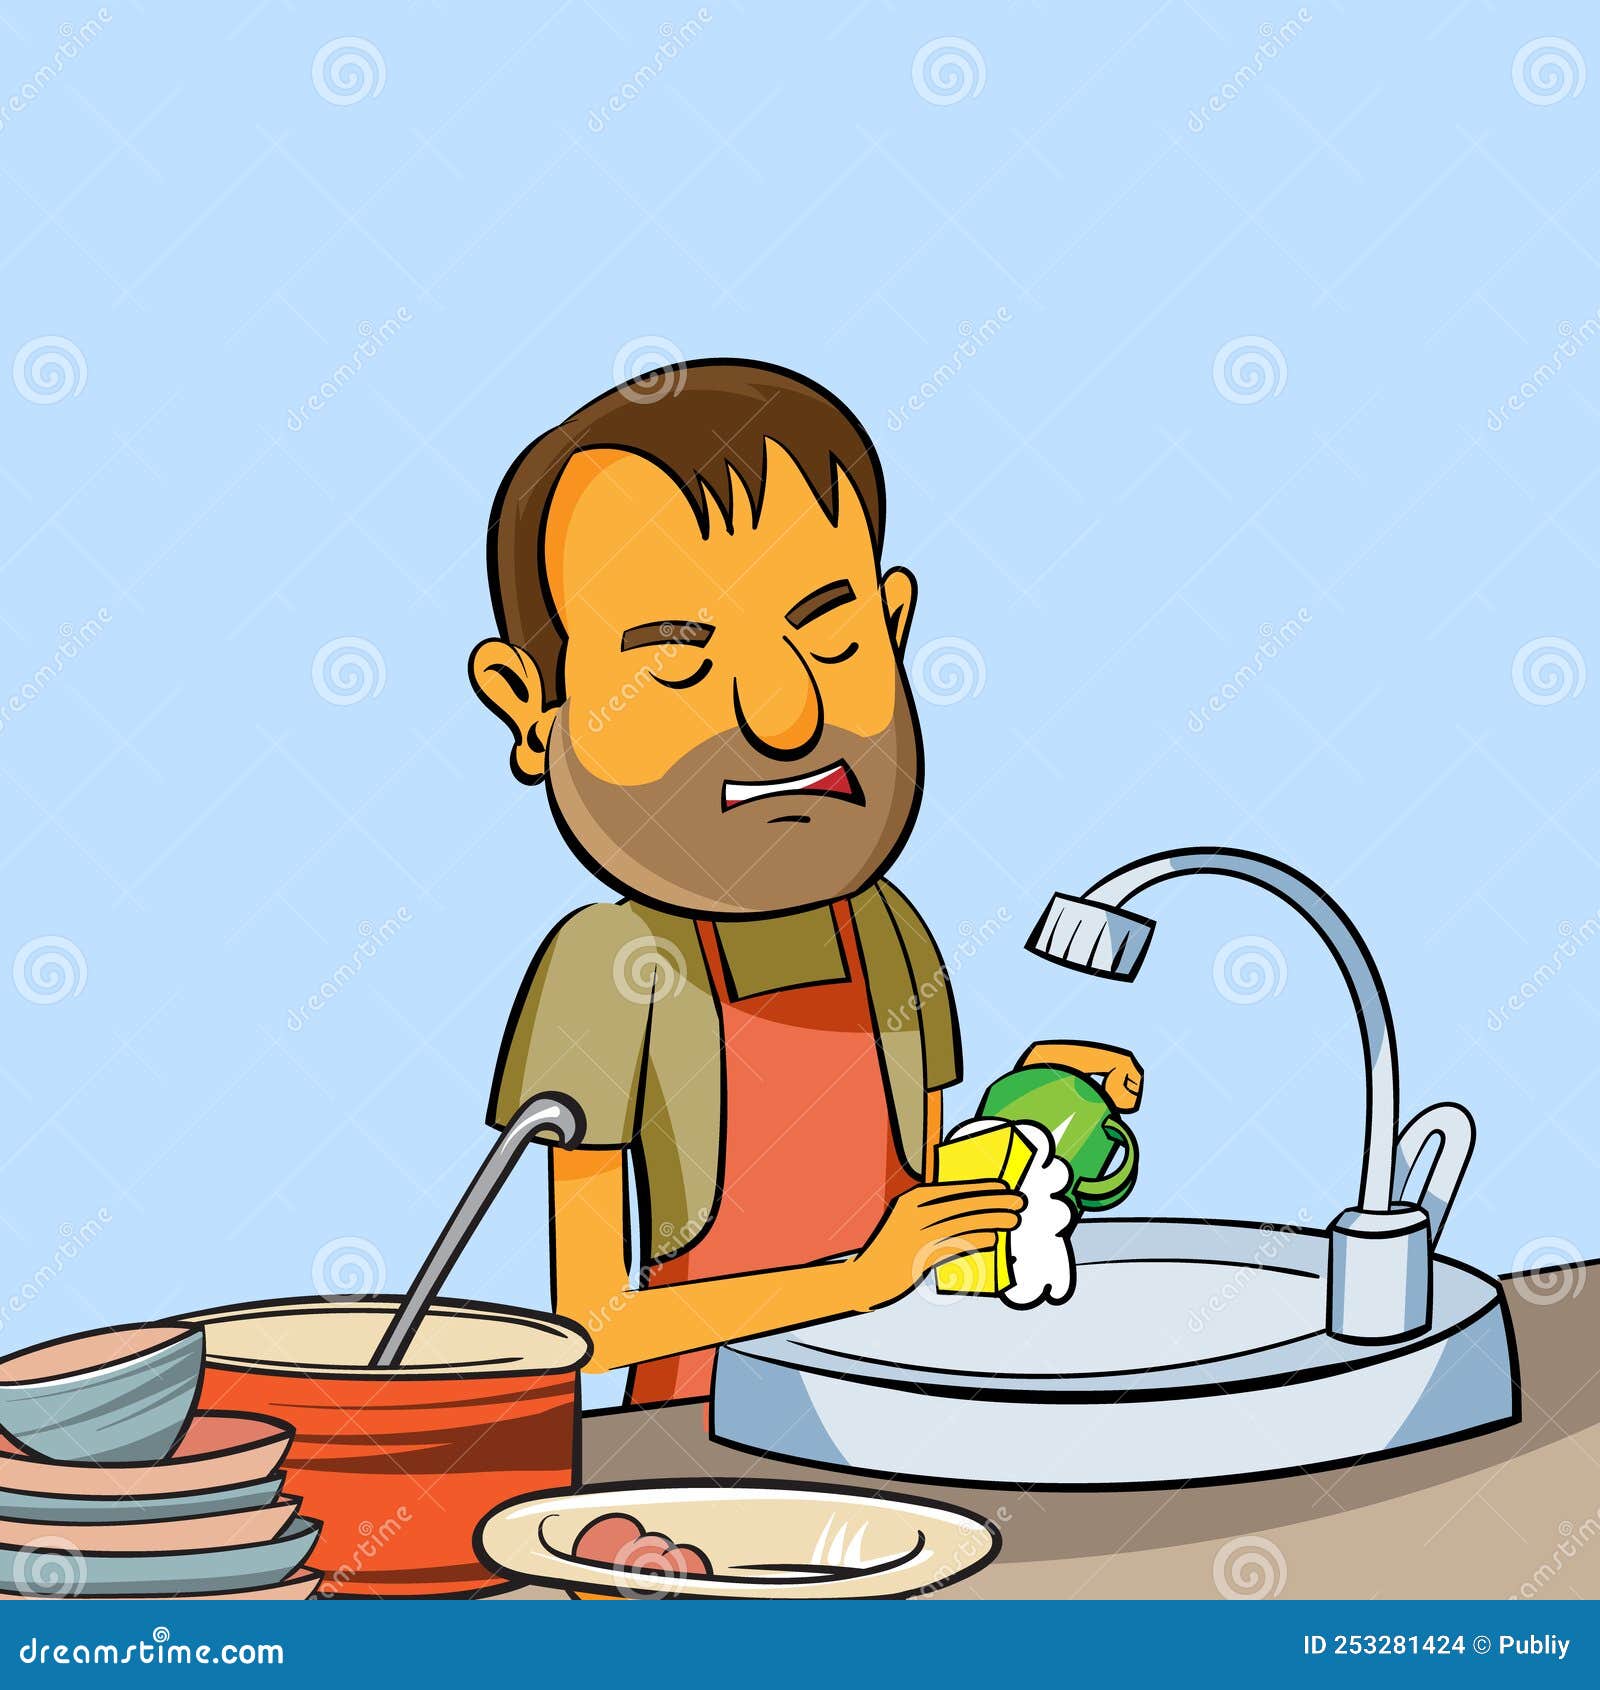 https://thumbs.dreamstime.com/z/illustration-man-who-washing-up-dishes-young-cartoon-isolated-background-253281424.jpg